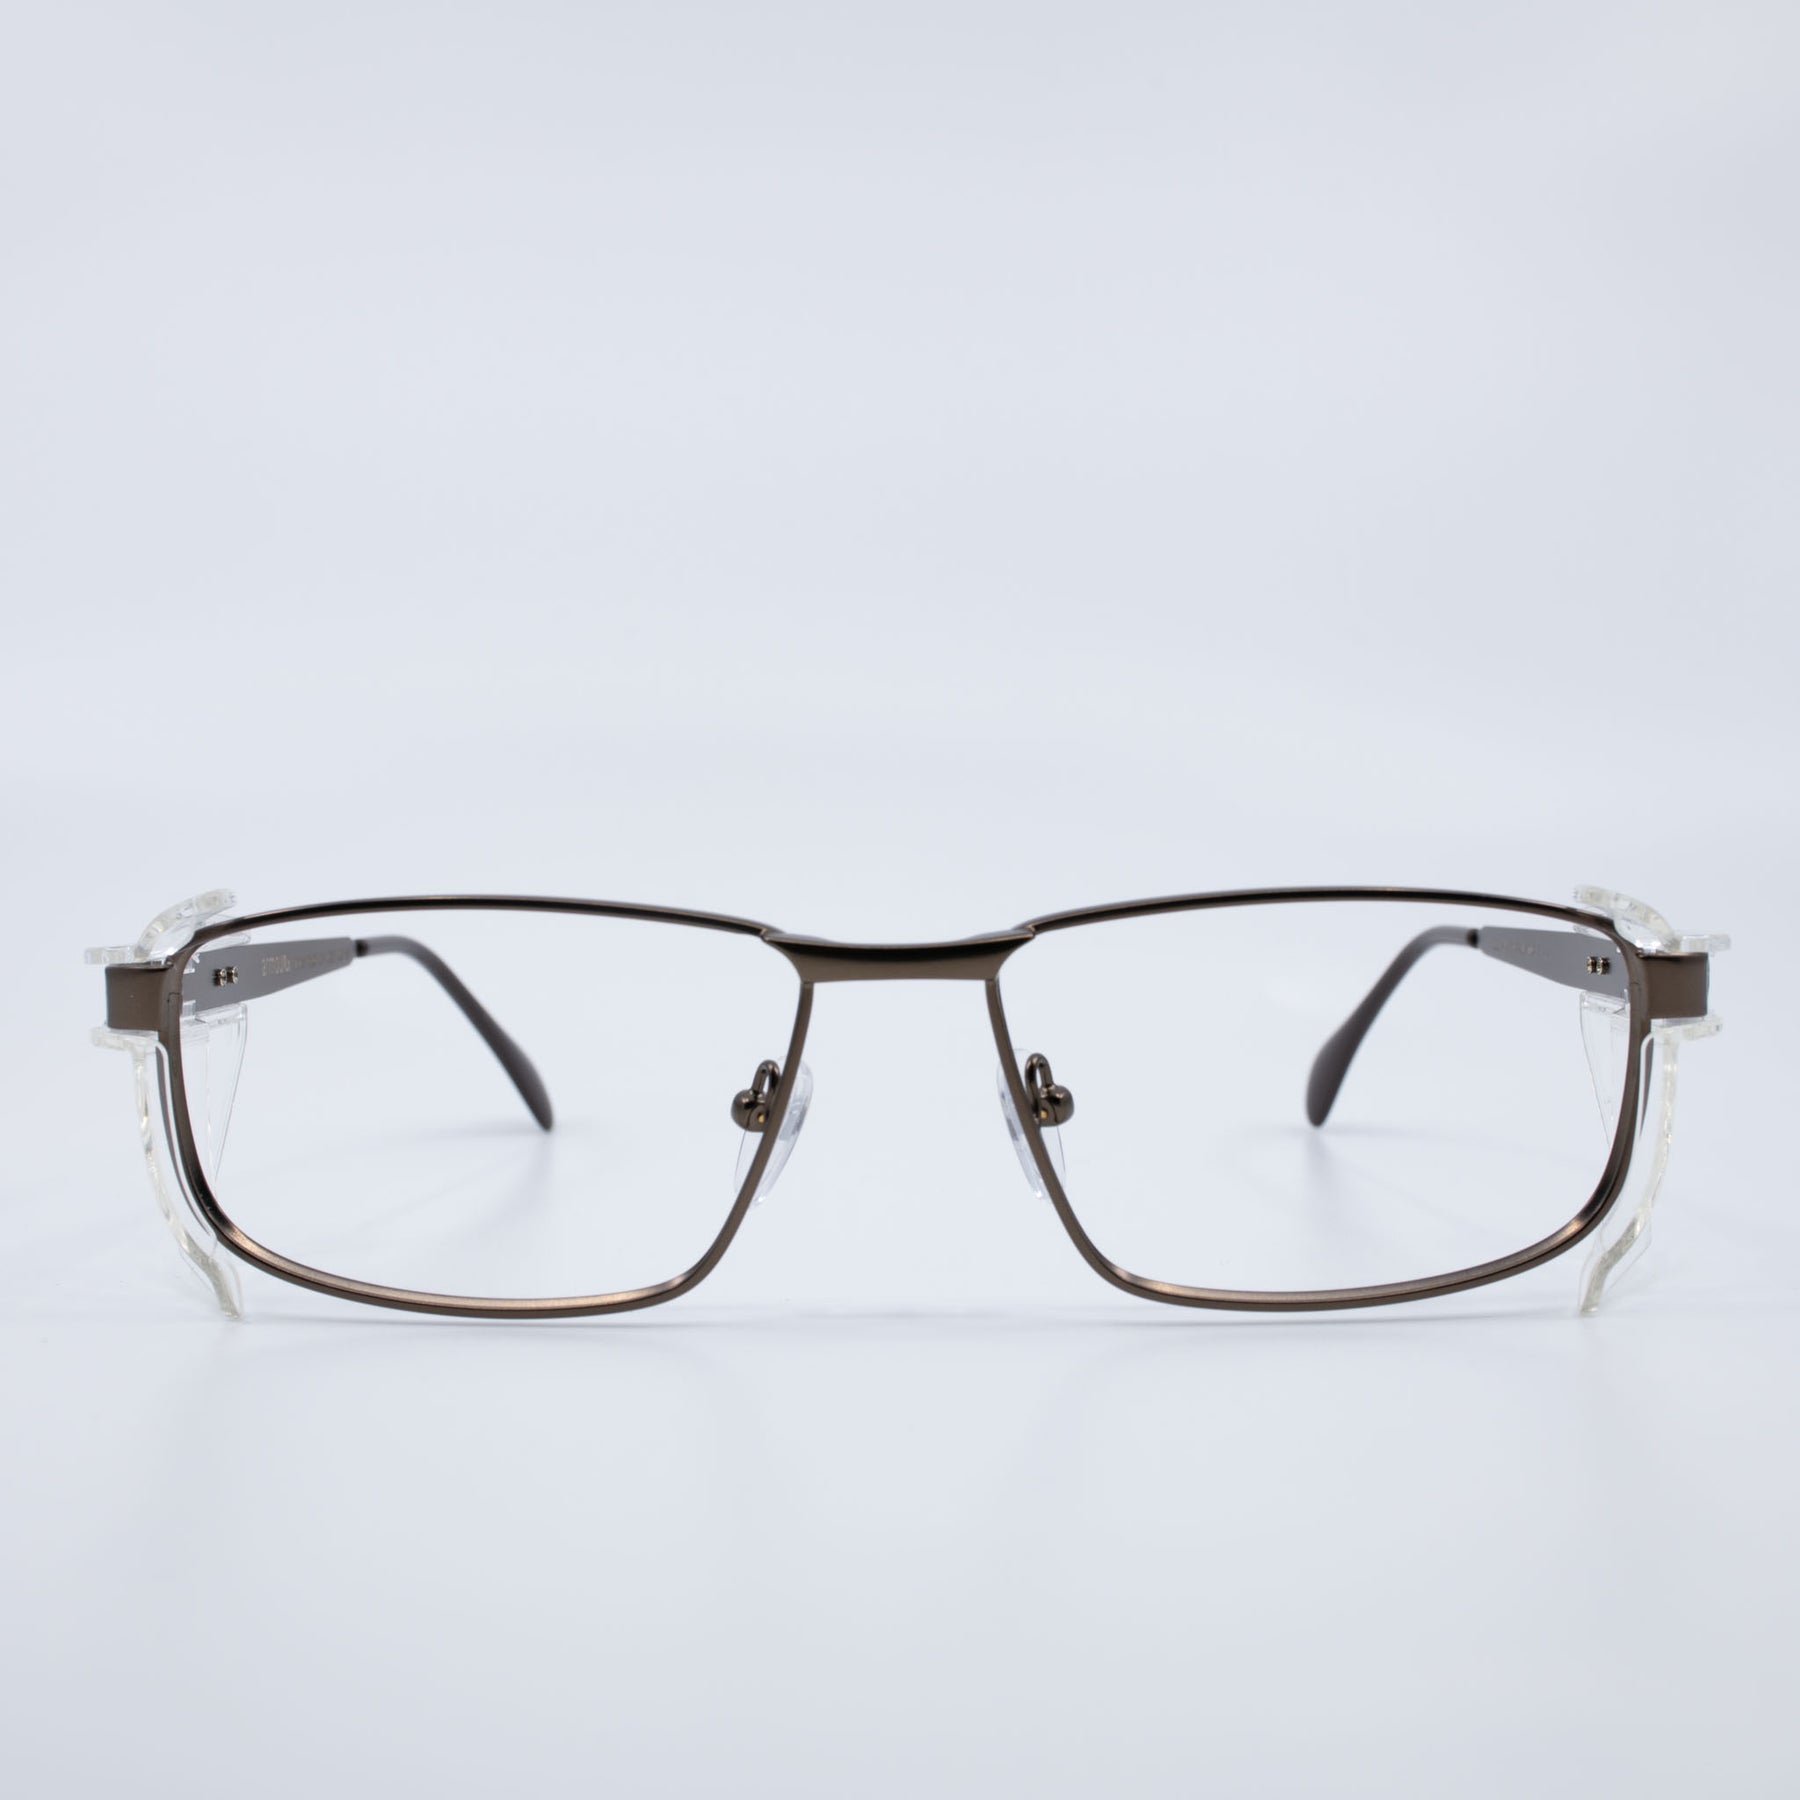 ArmouRx 7400 Brown Safety Glasses – Go Safety Vision